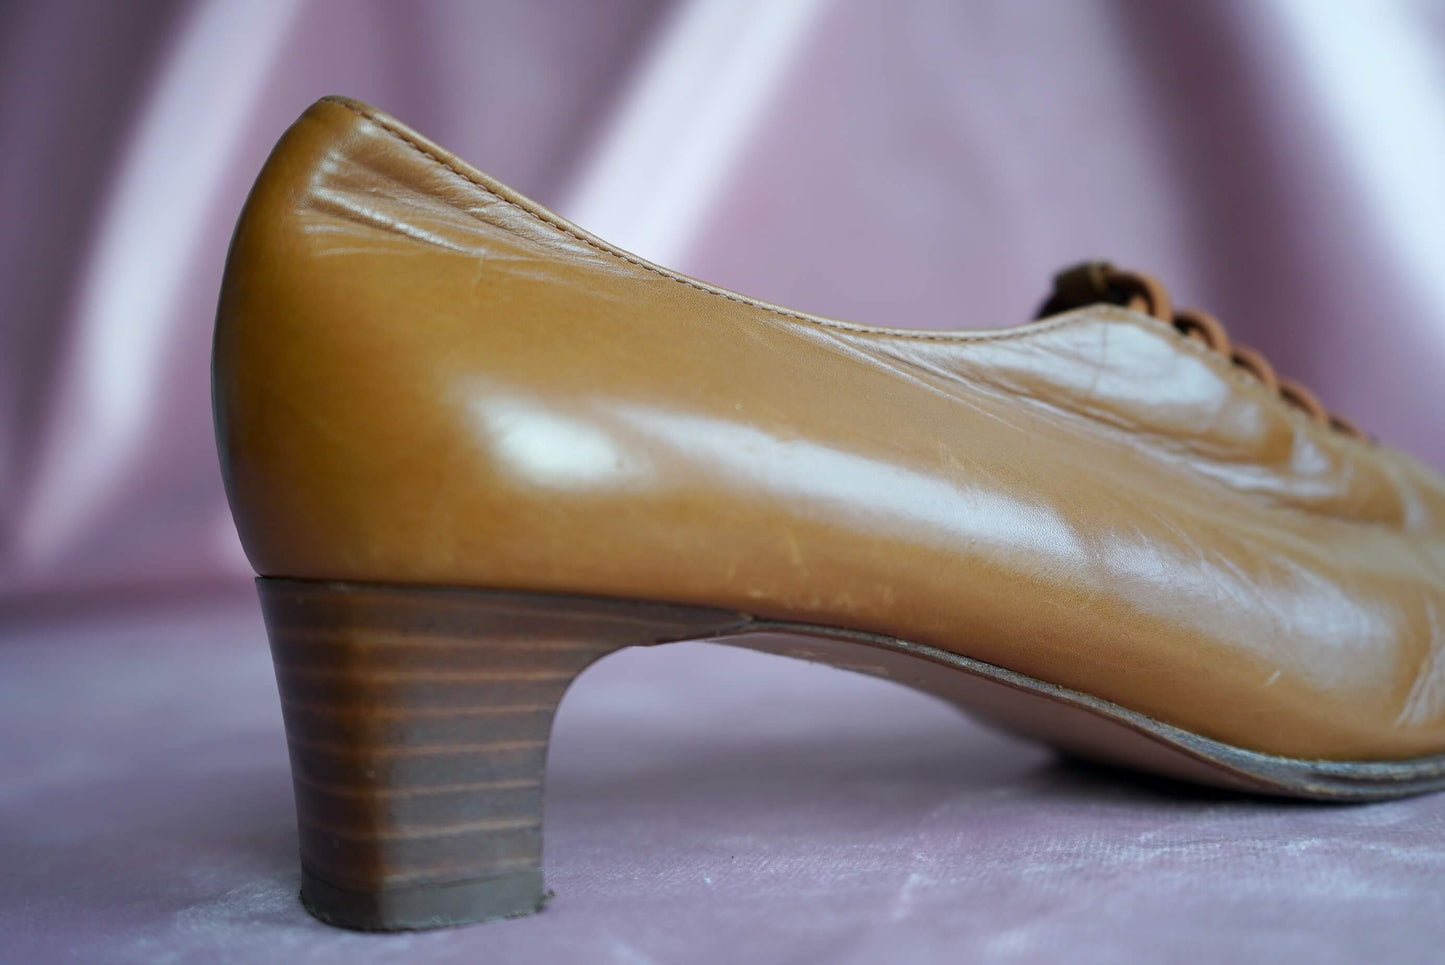 Vintage Tanned Mini Heel Shoes Size 4